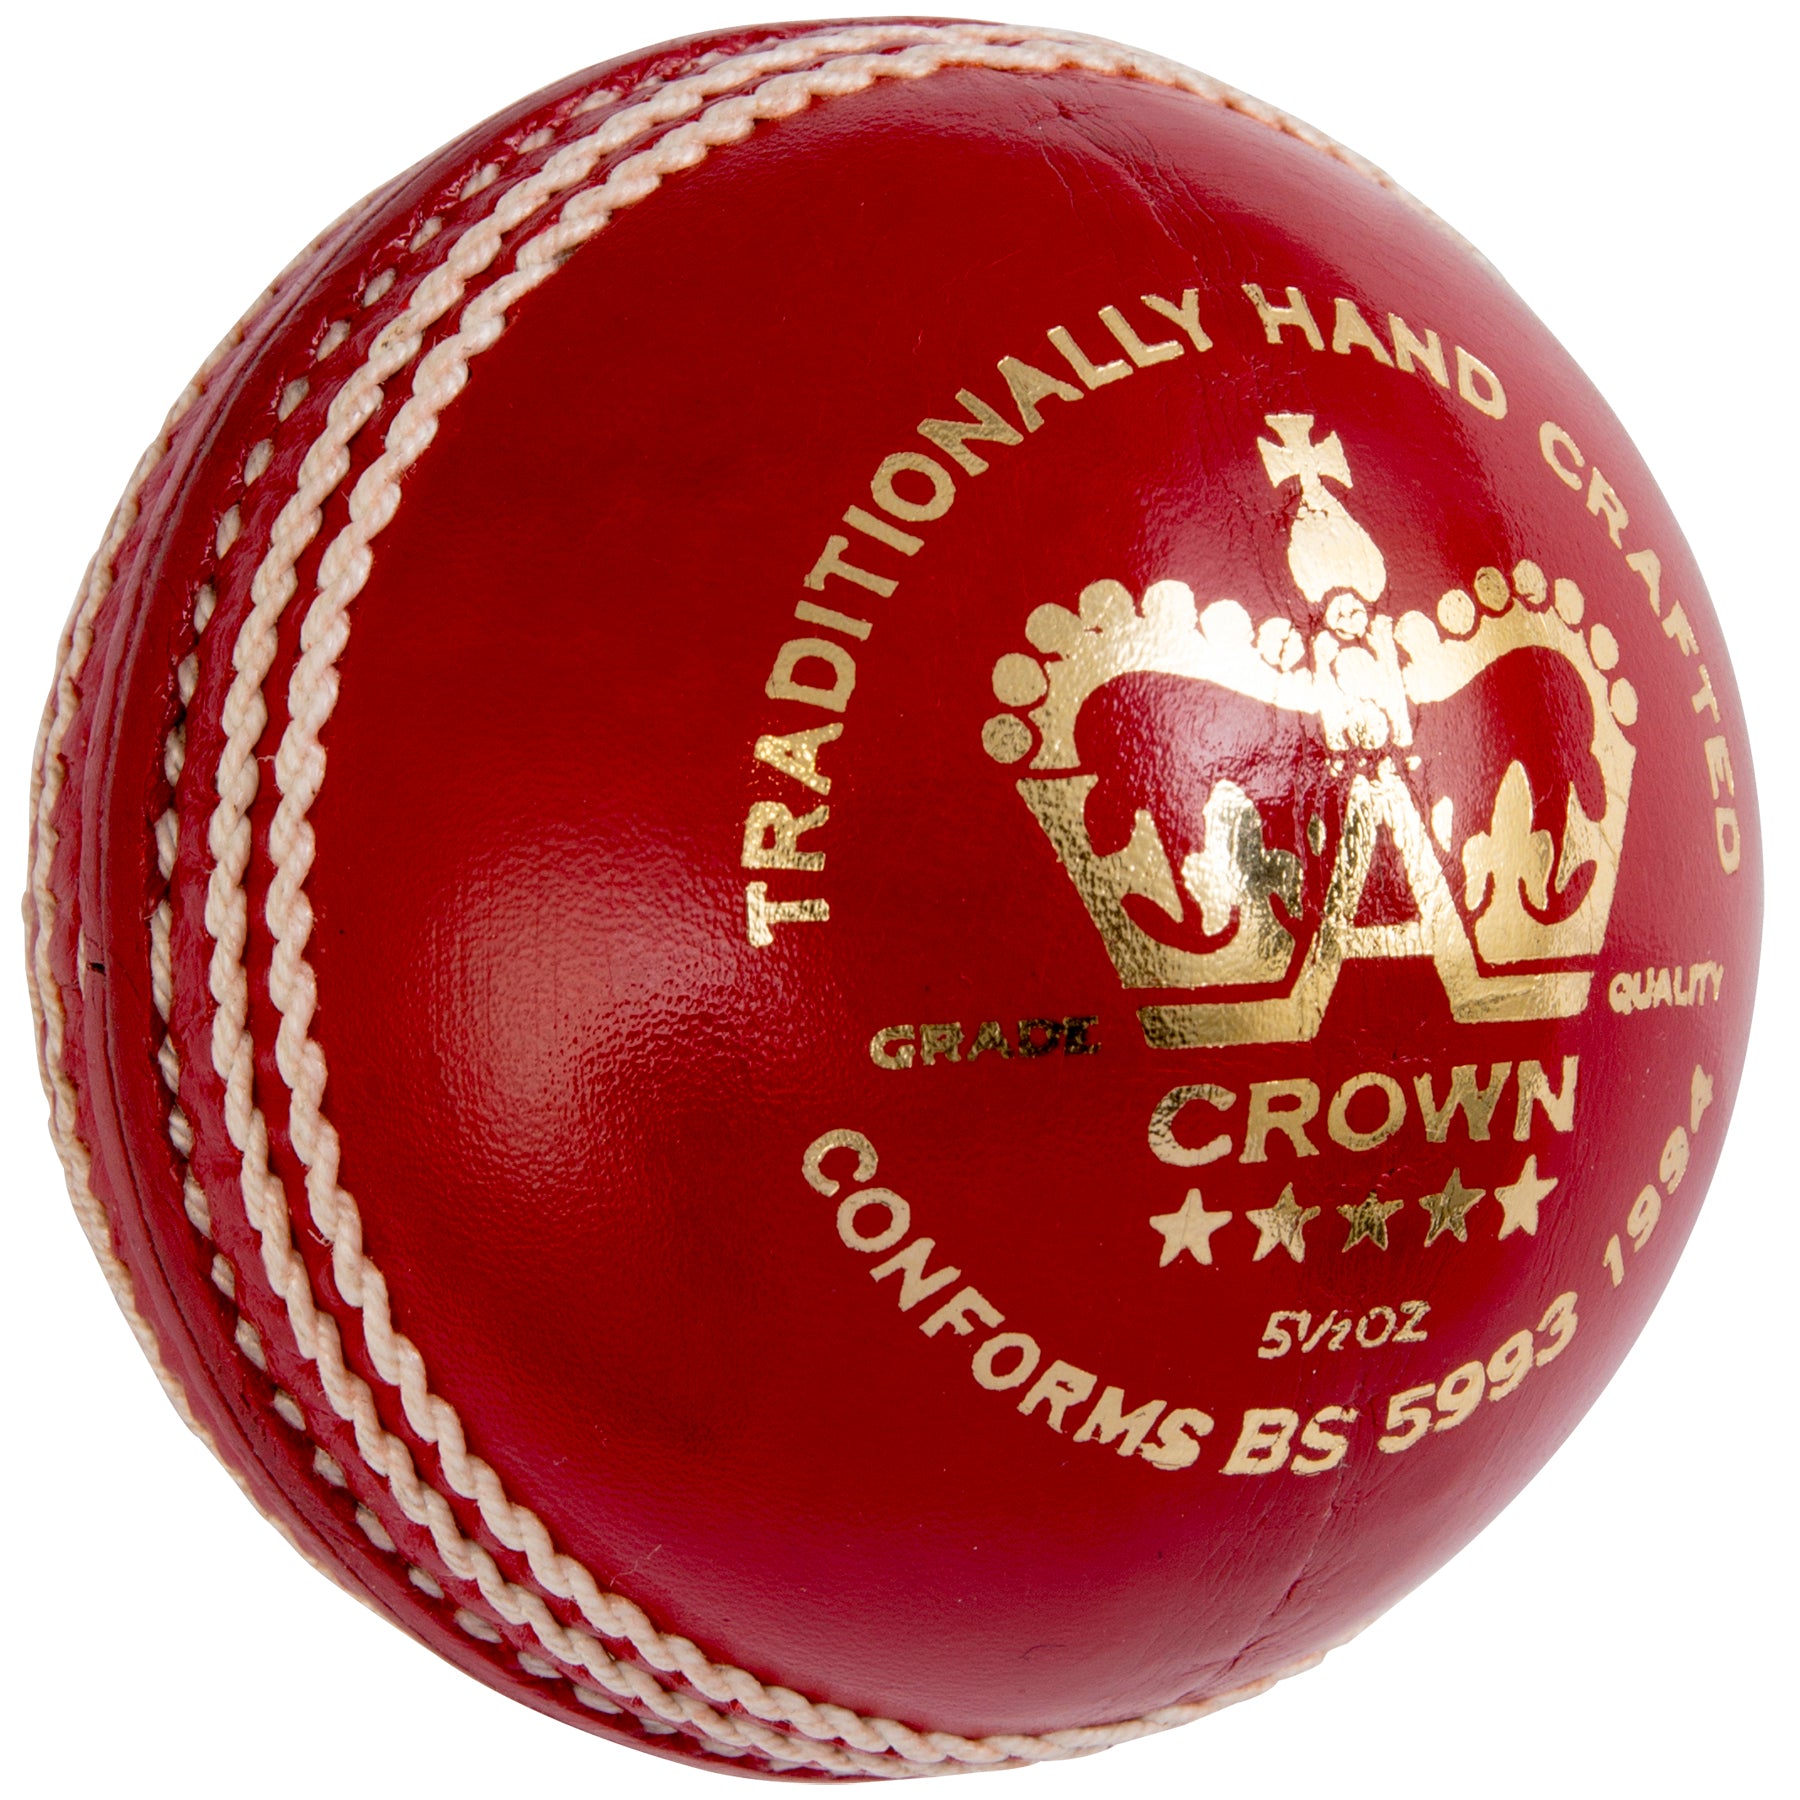 Women's SCL Crown 5 Star Cricket Ball - Red